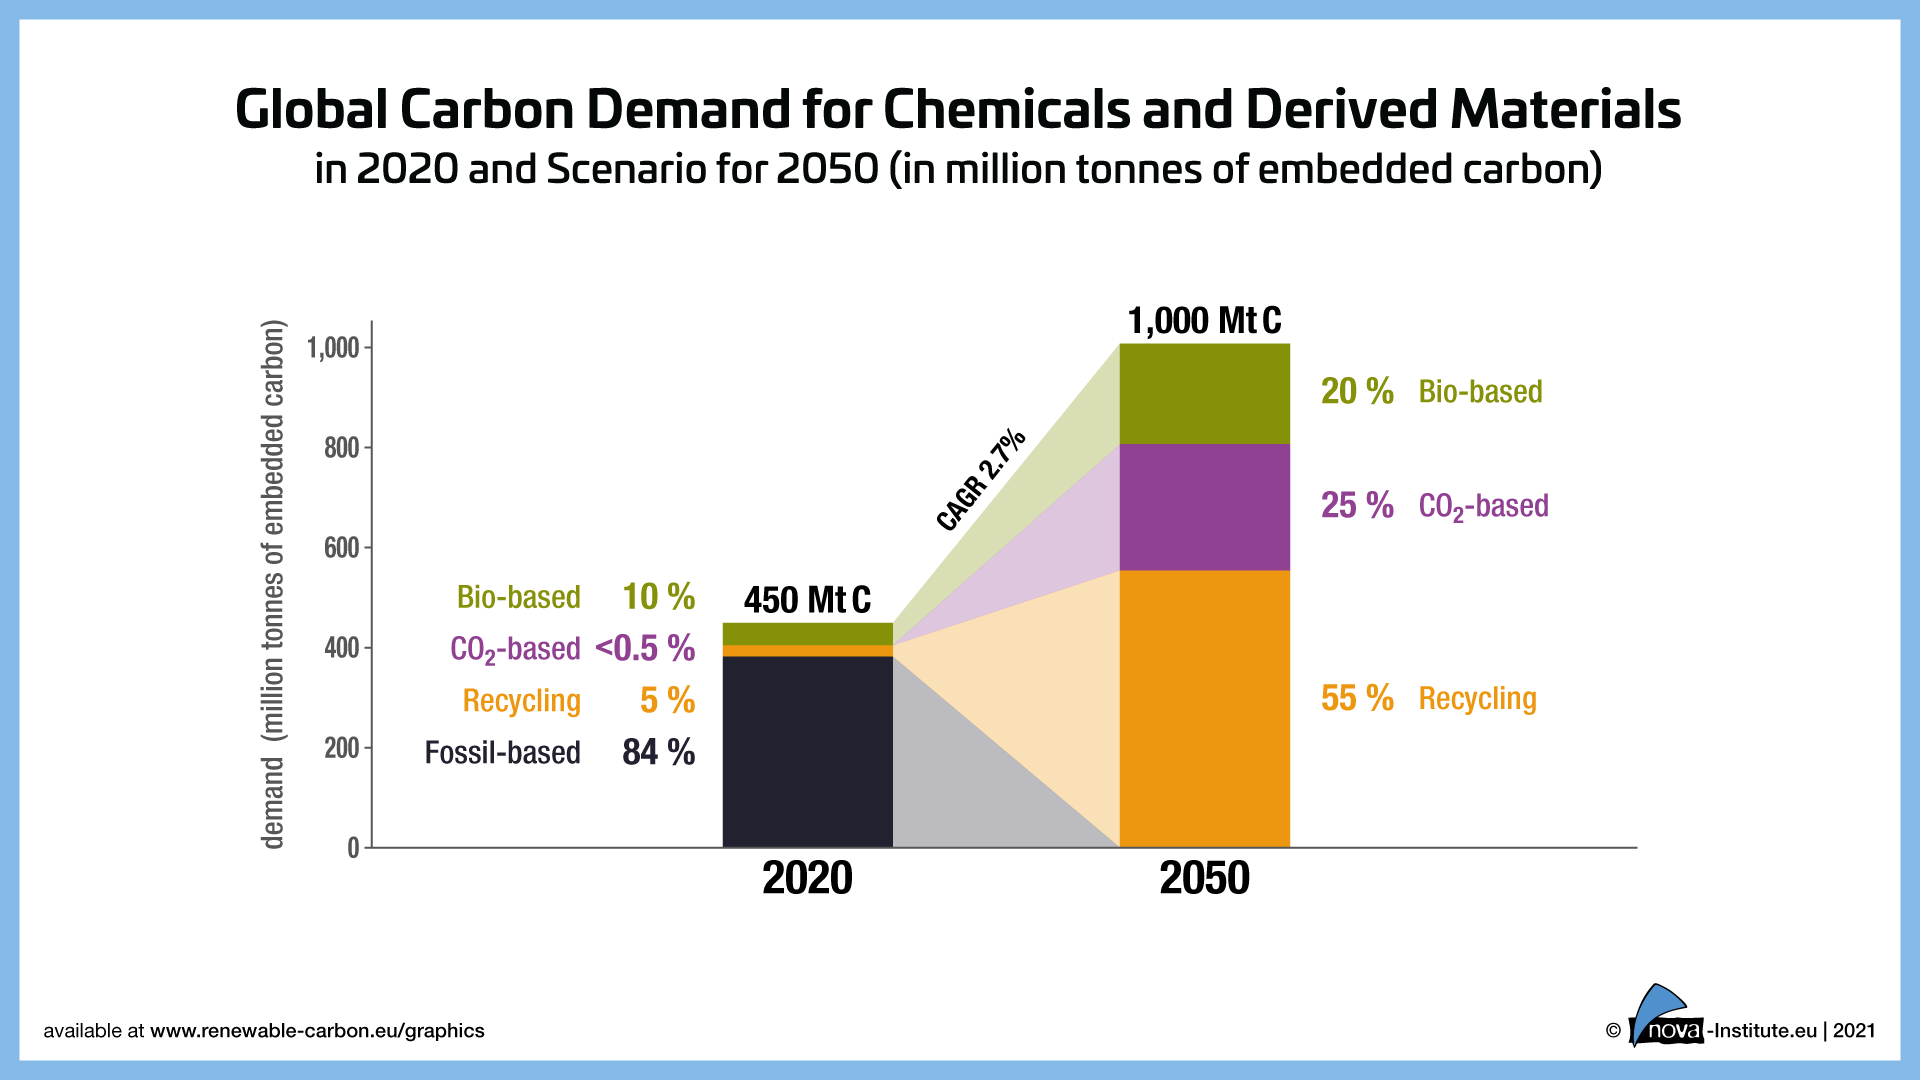 Graphic 2: Scenario for the future global demand of embedded carbon for chemicals and derived materials in 2050